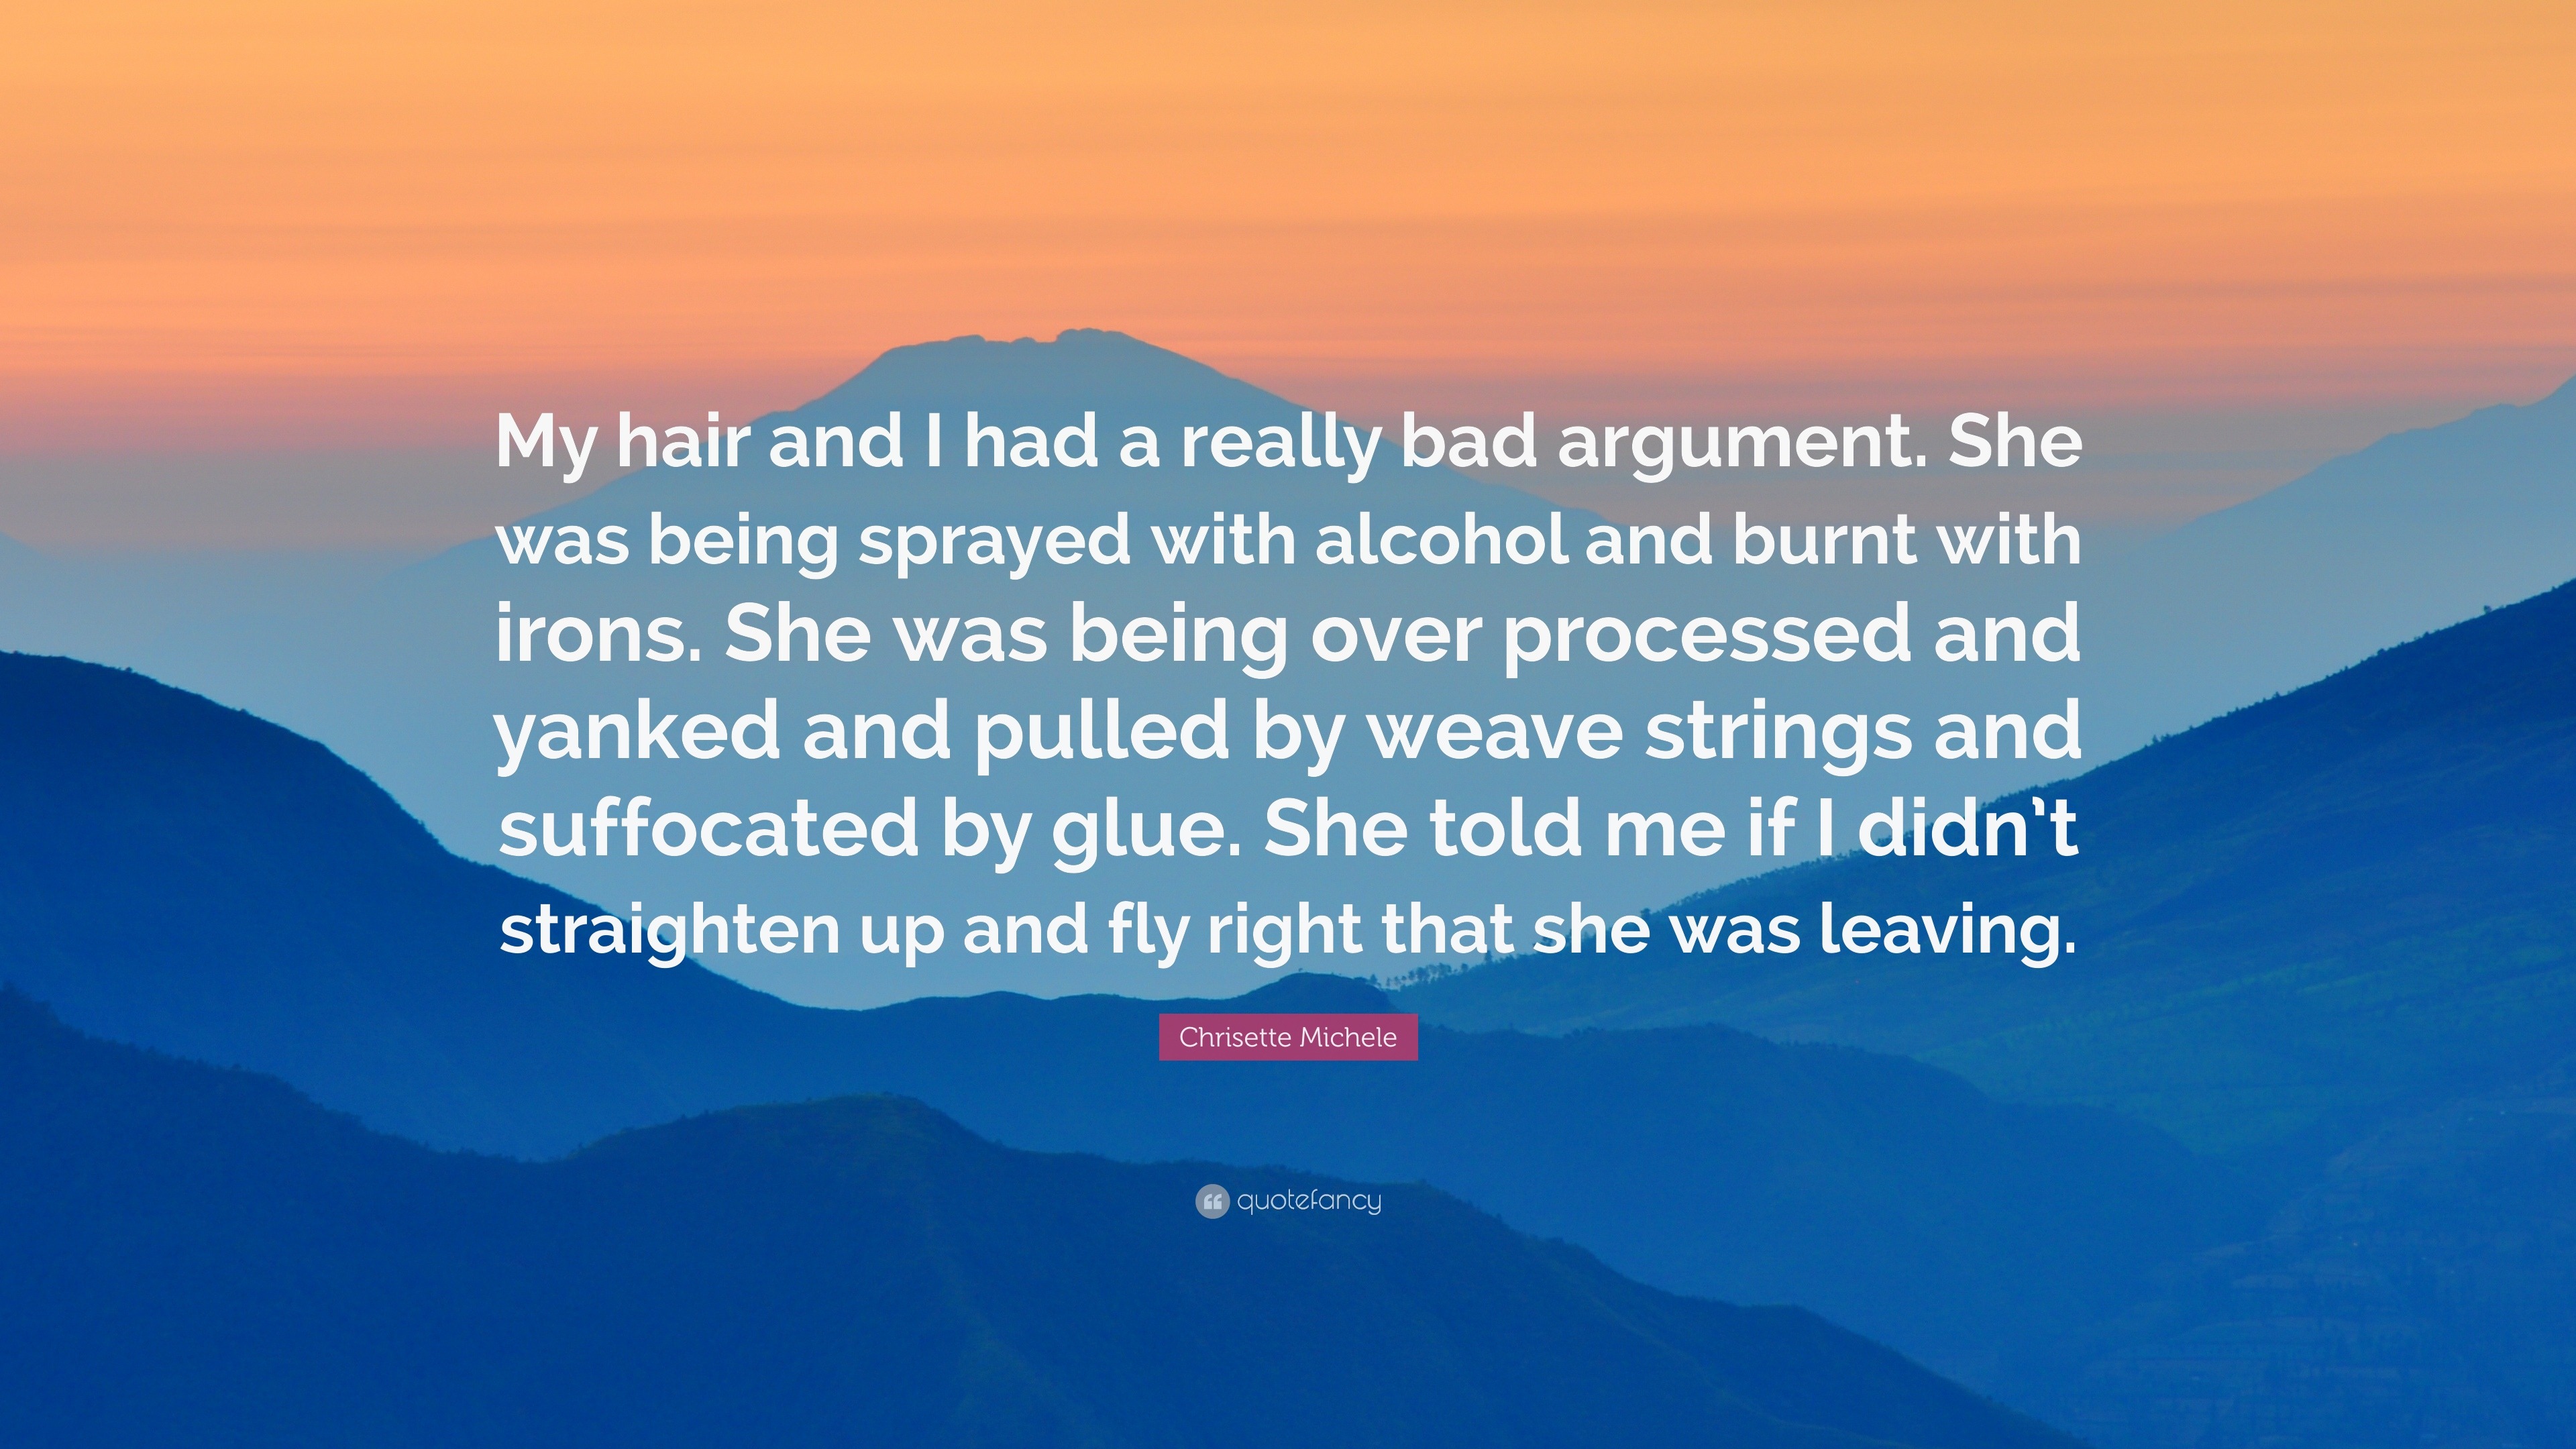 Chrisette Michele Quote: “My hair and I had a really bad argument. She was  being sprayed with alcohol and burnt with irons. She was being over pro...”